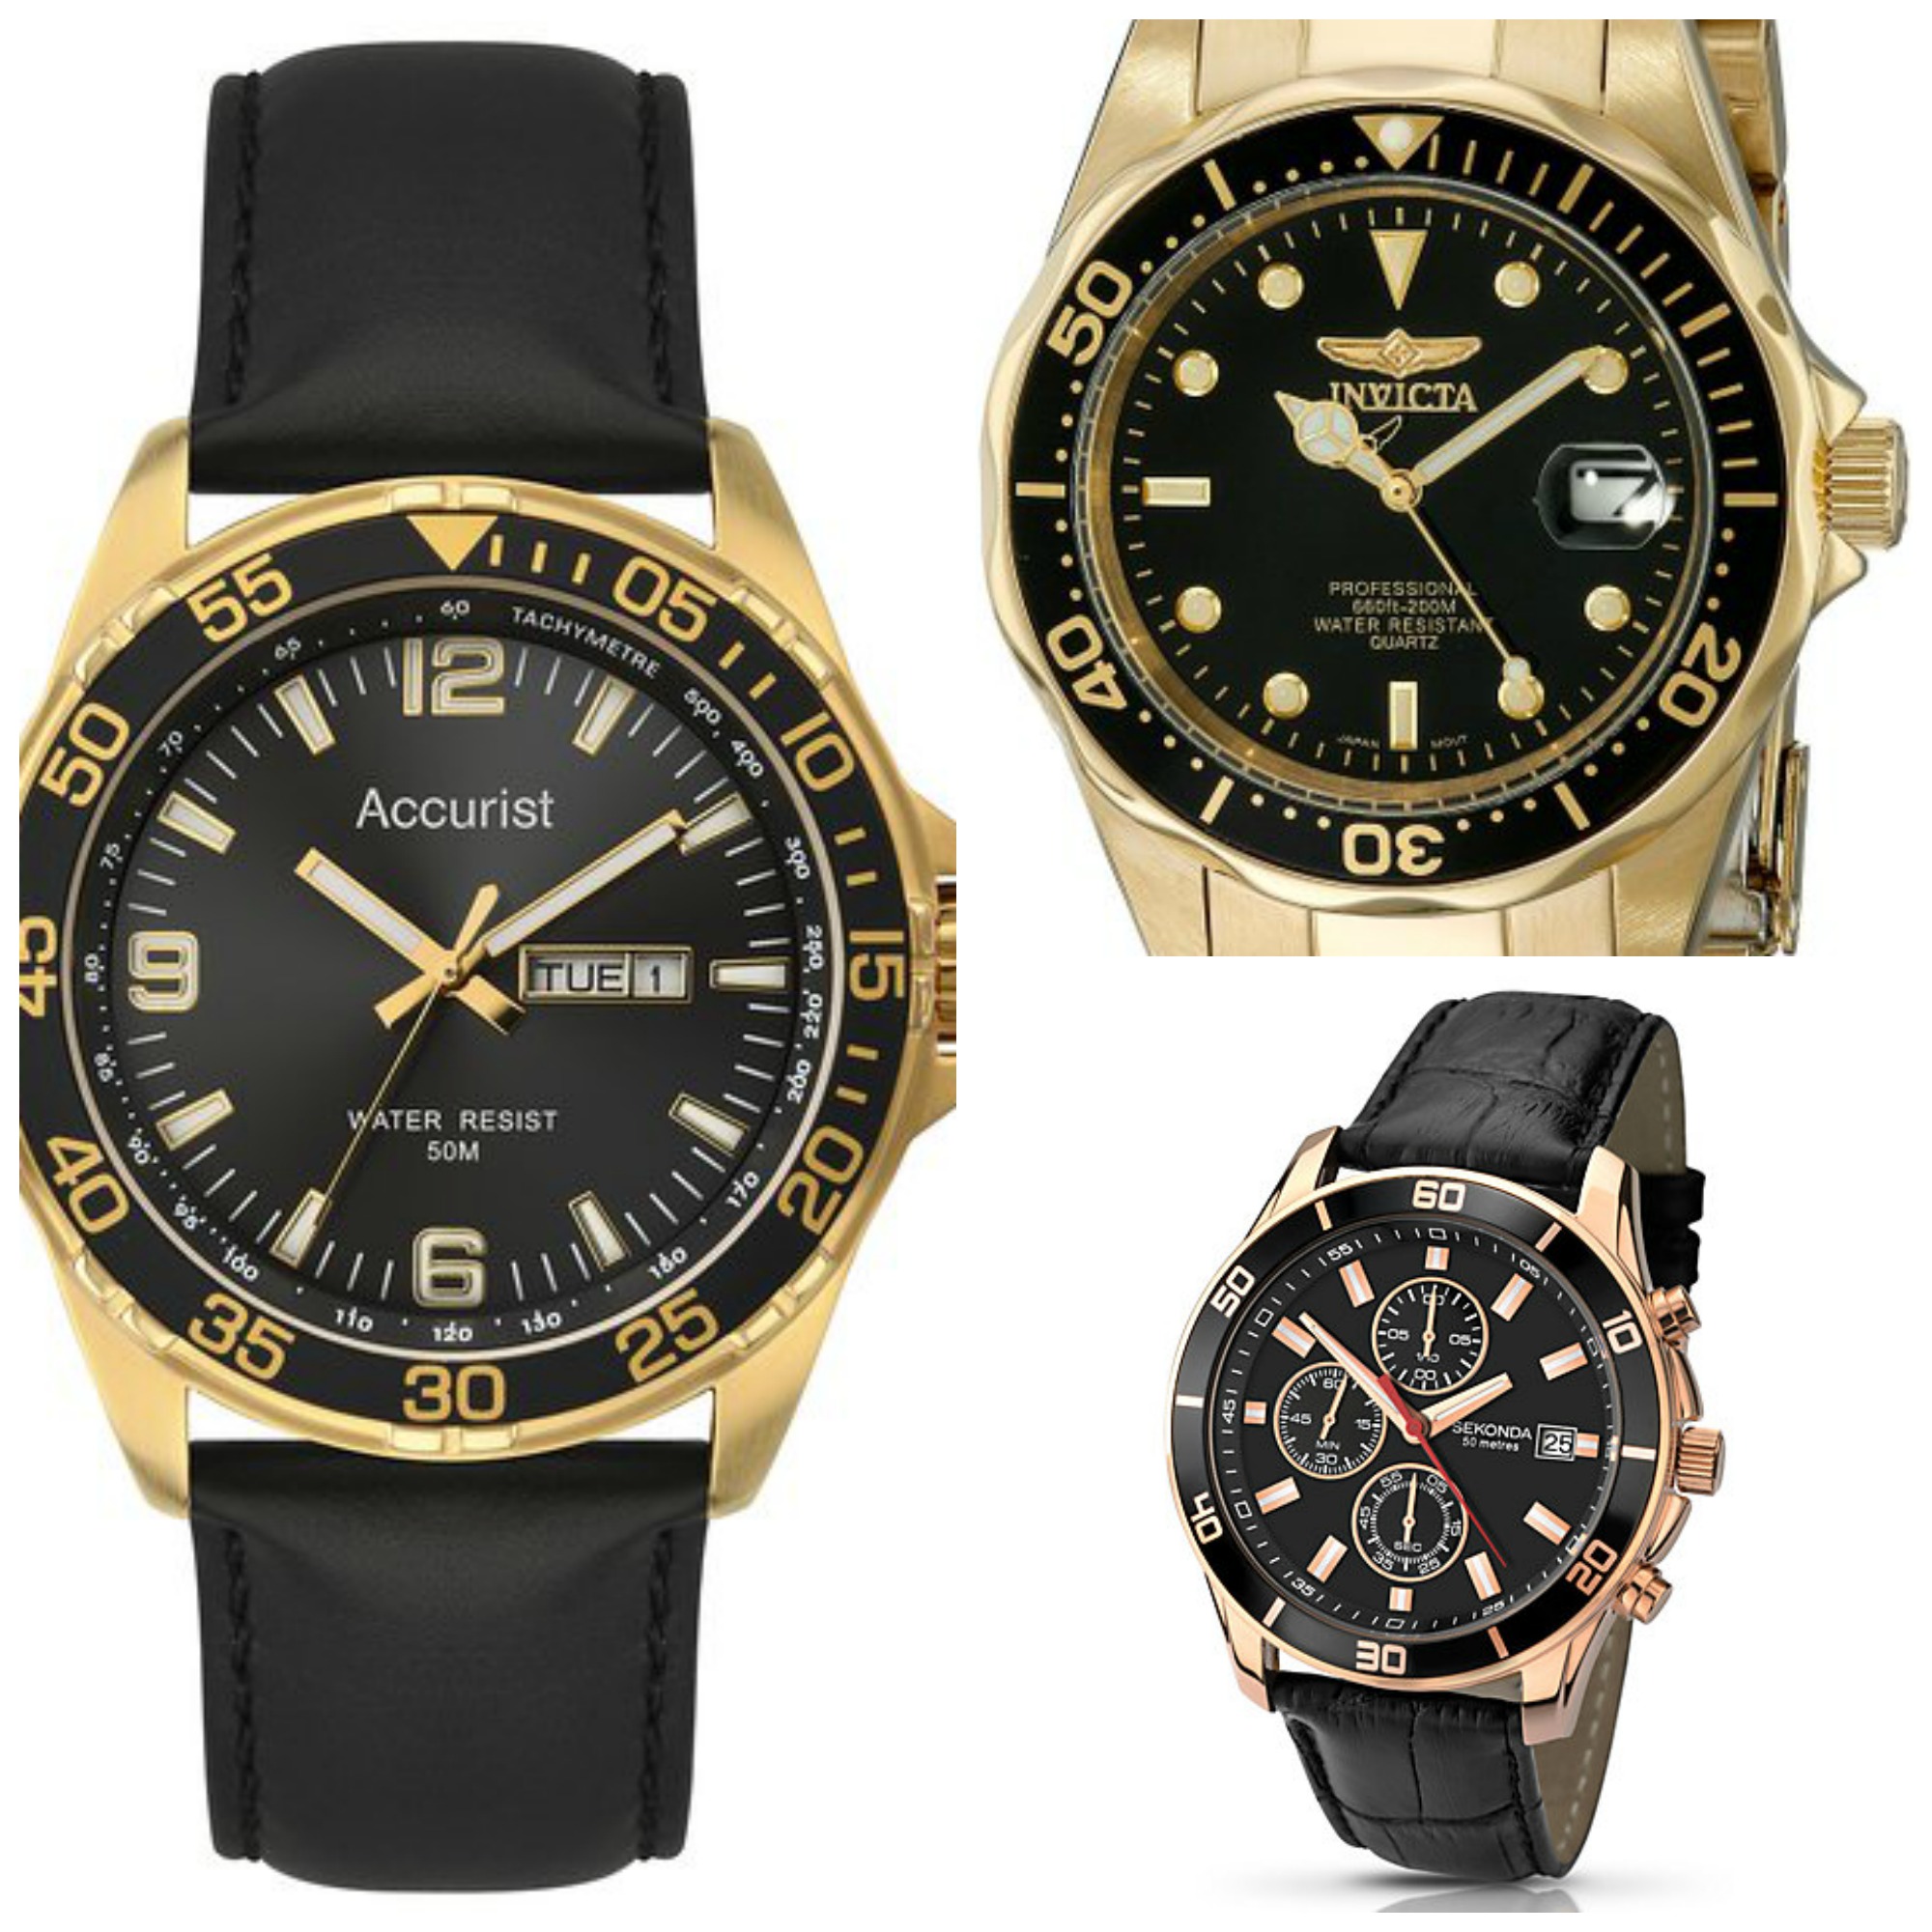 The Best Men's Black & Gold Watches For All Budgets